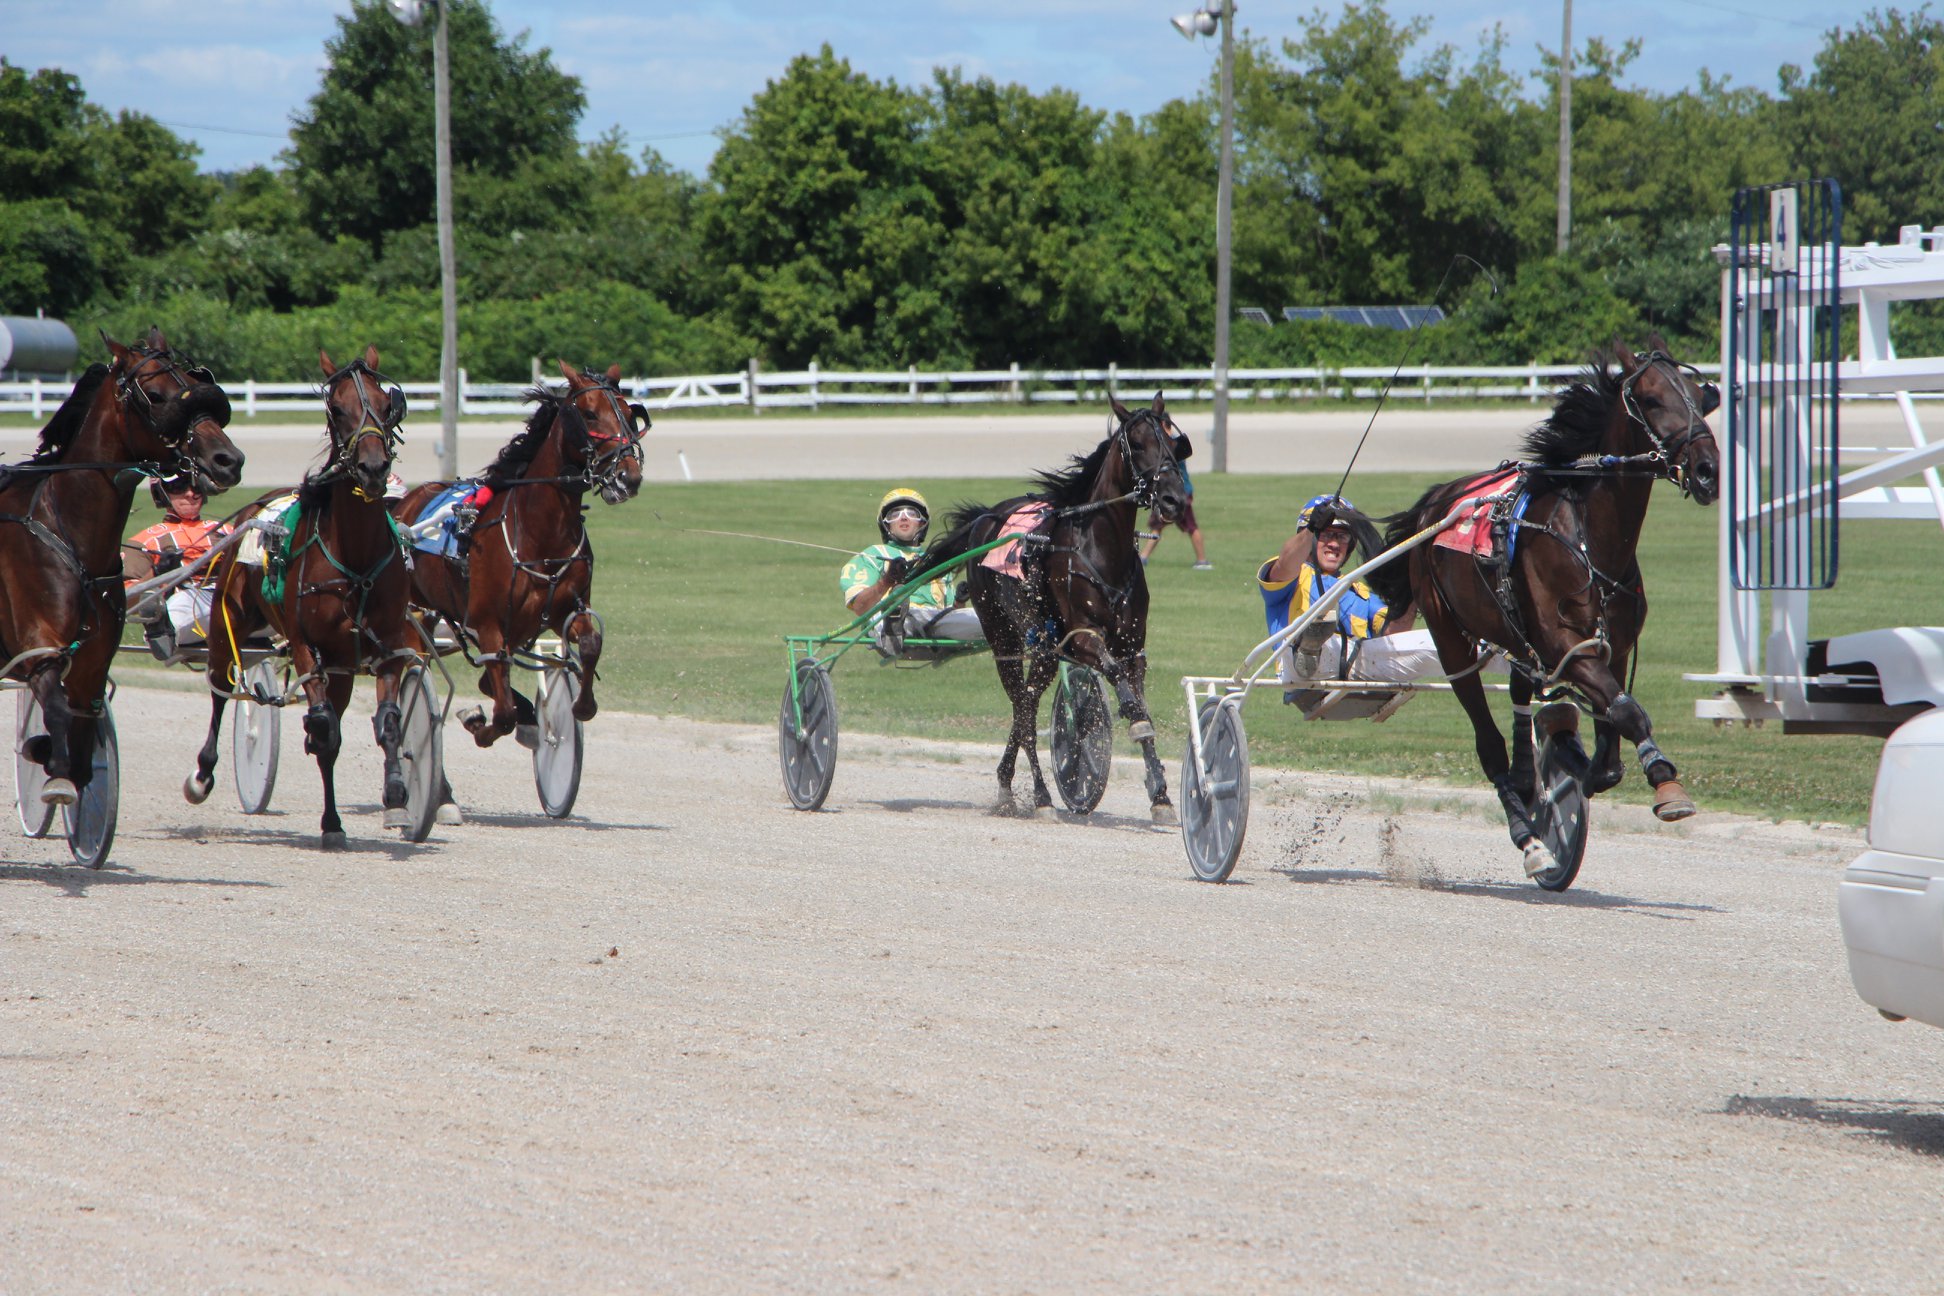 Bain vs. Barnsdale: Leader Opens Up in Battle of Leamington Raceway Handicappers